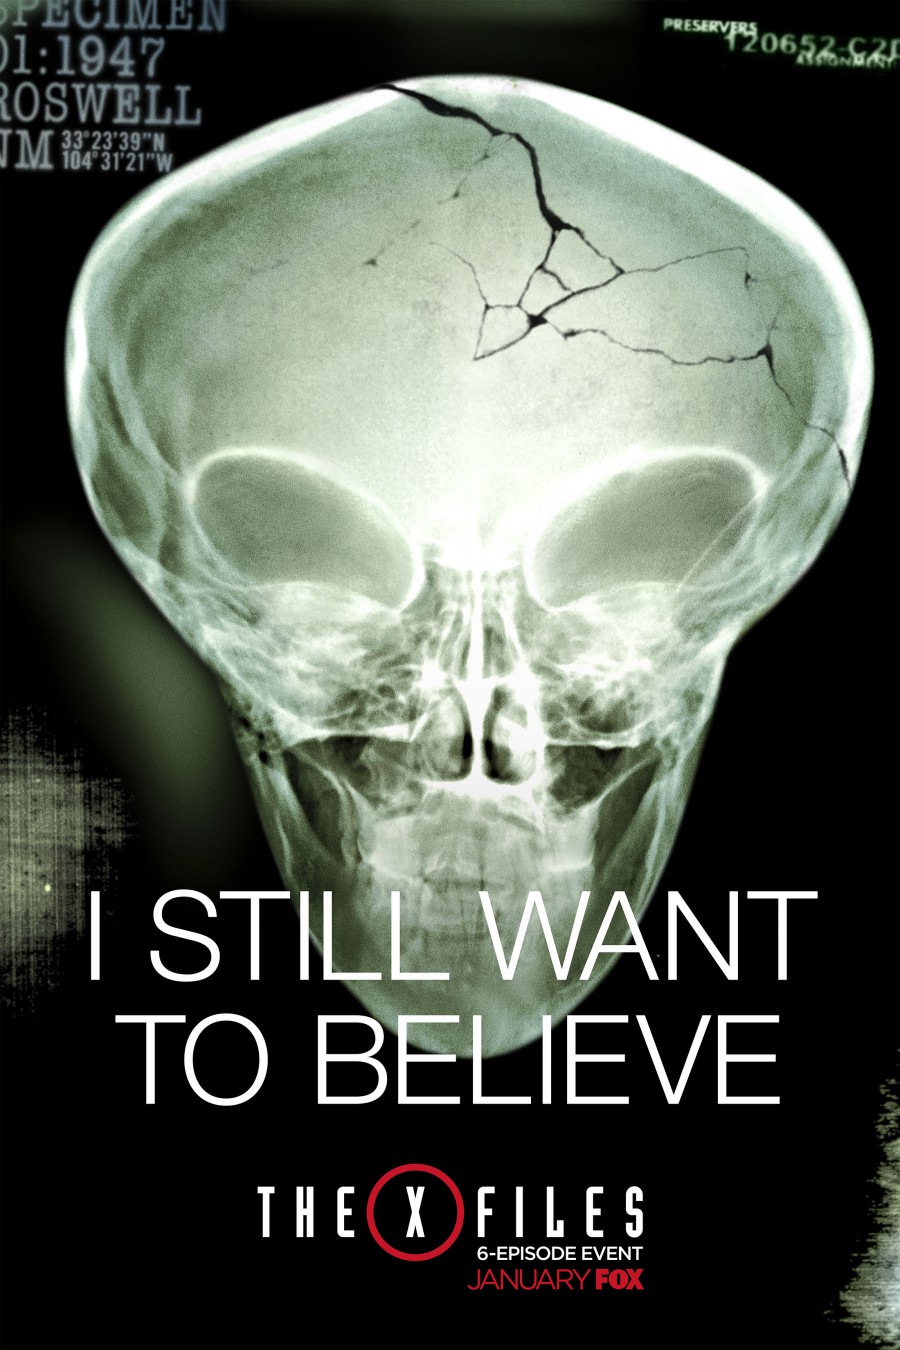 roswell-x-files-poster-e1446173970305